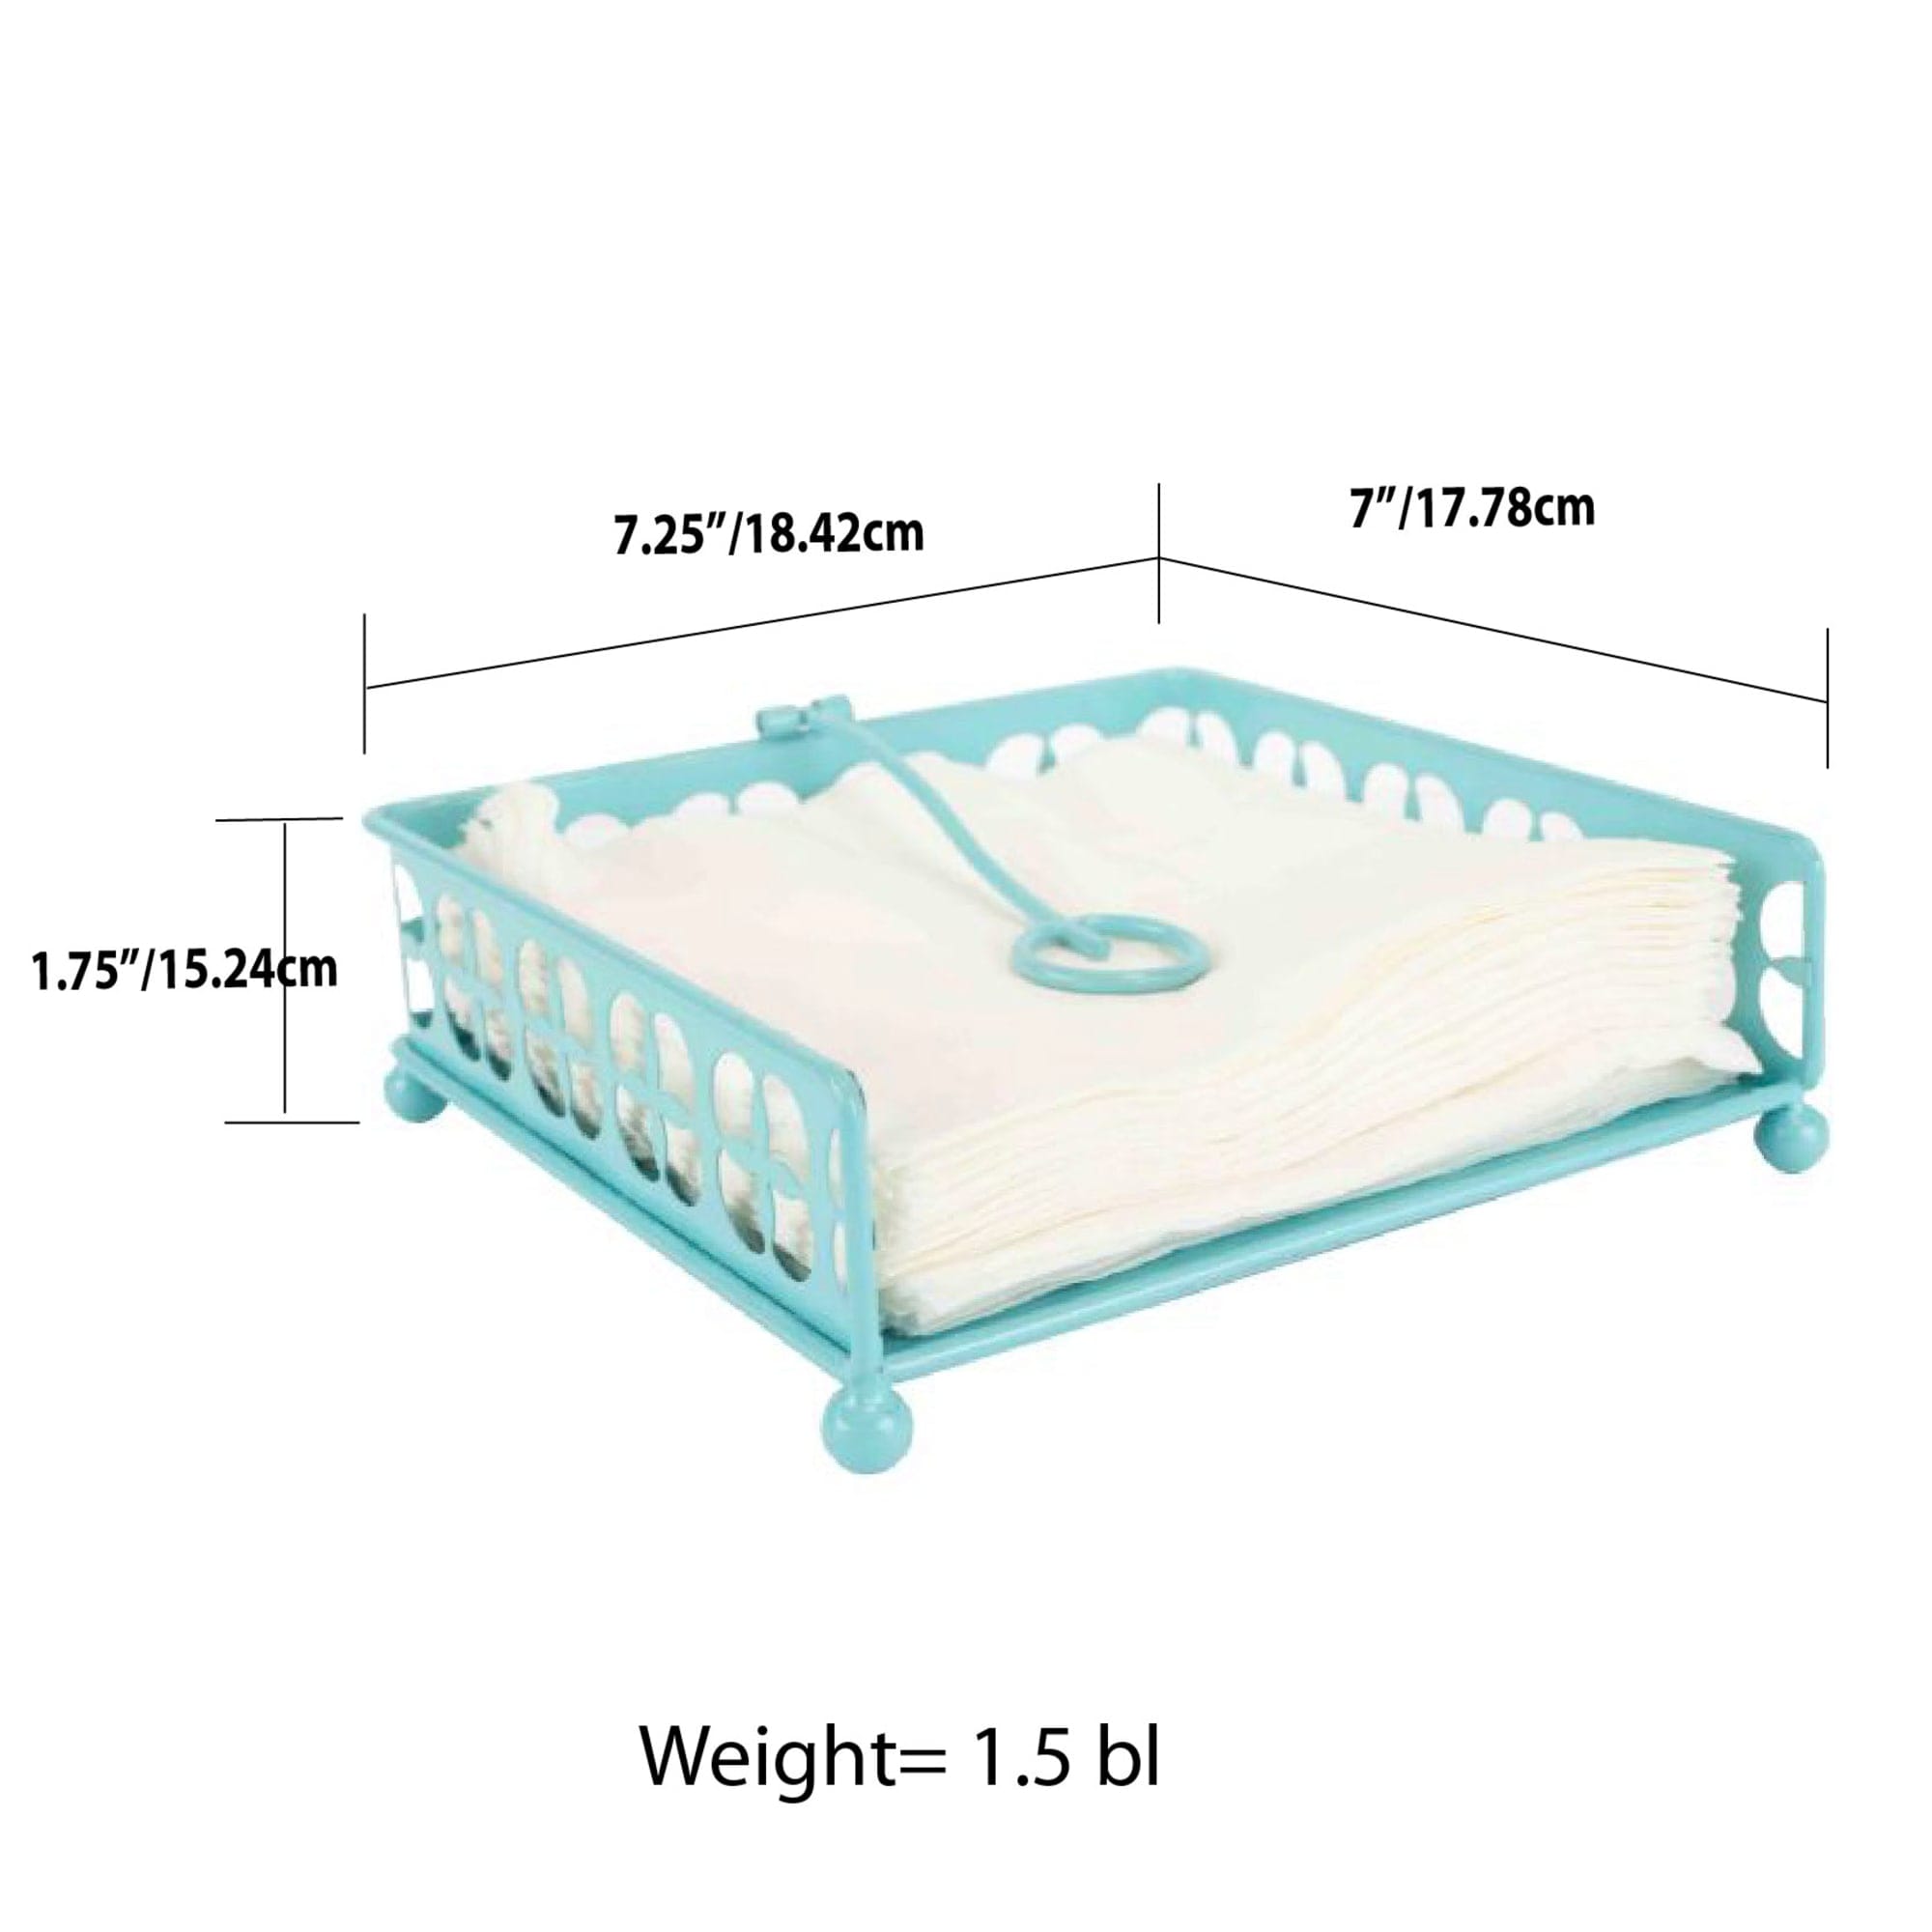 Home Basics Turquoise Collection Trinity Flat Napkin Holder, Turquoise $6.00 EACH, CASE PACK OF 12